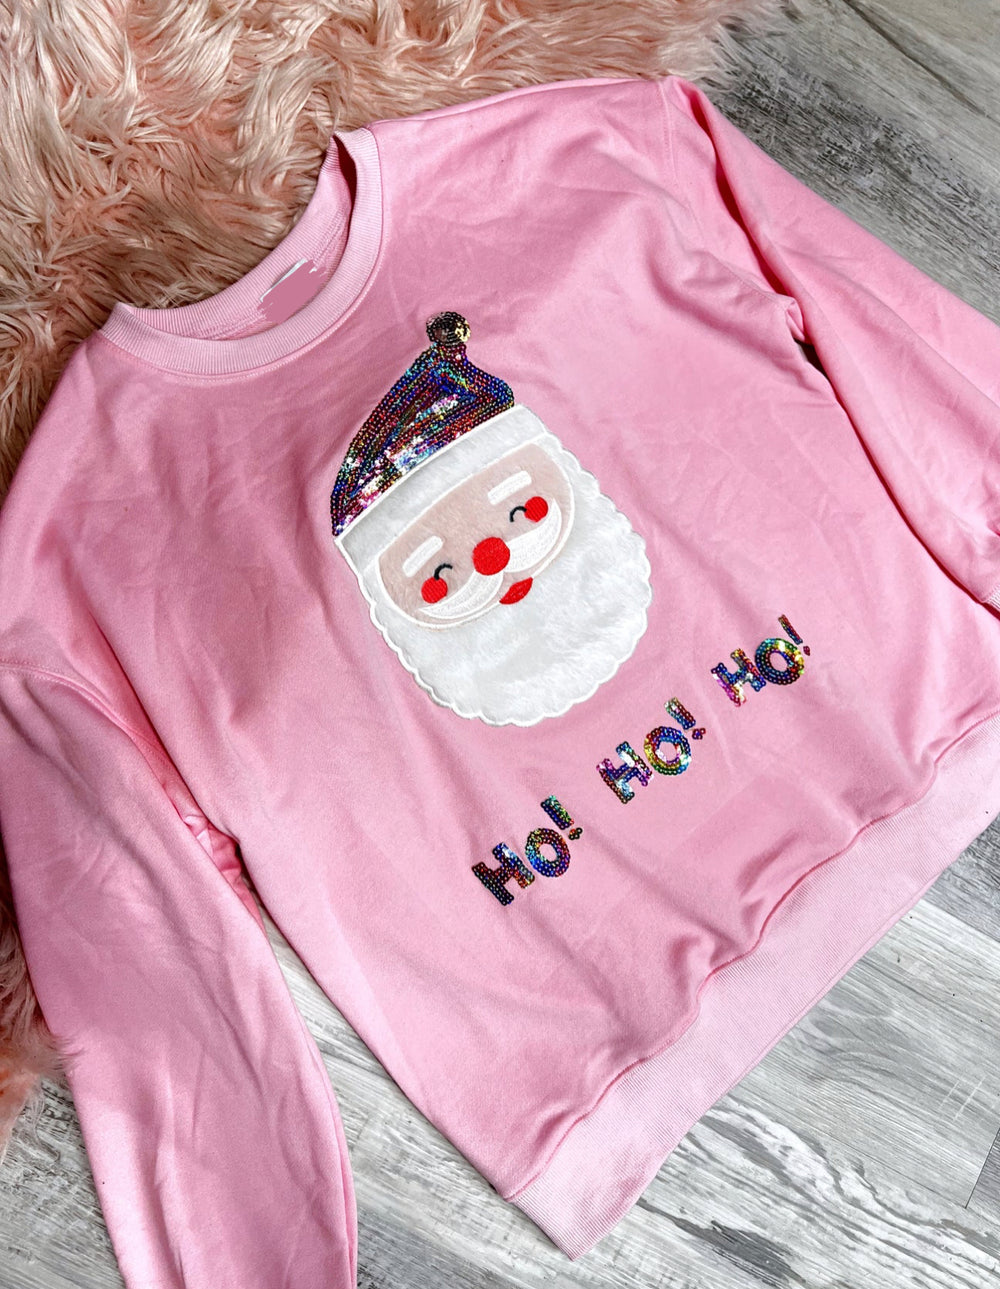 Ho Ho Ho Santa Christmas Sweater-Sweaters-#N/A-Shop with Bloom West Boutique, Women's Fashion Boutique, Located in Houma, Louisiana